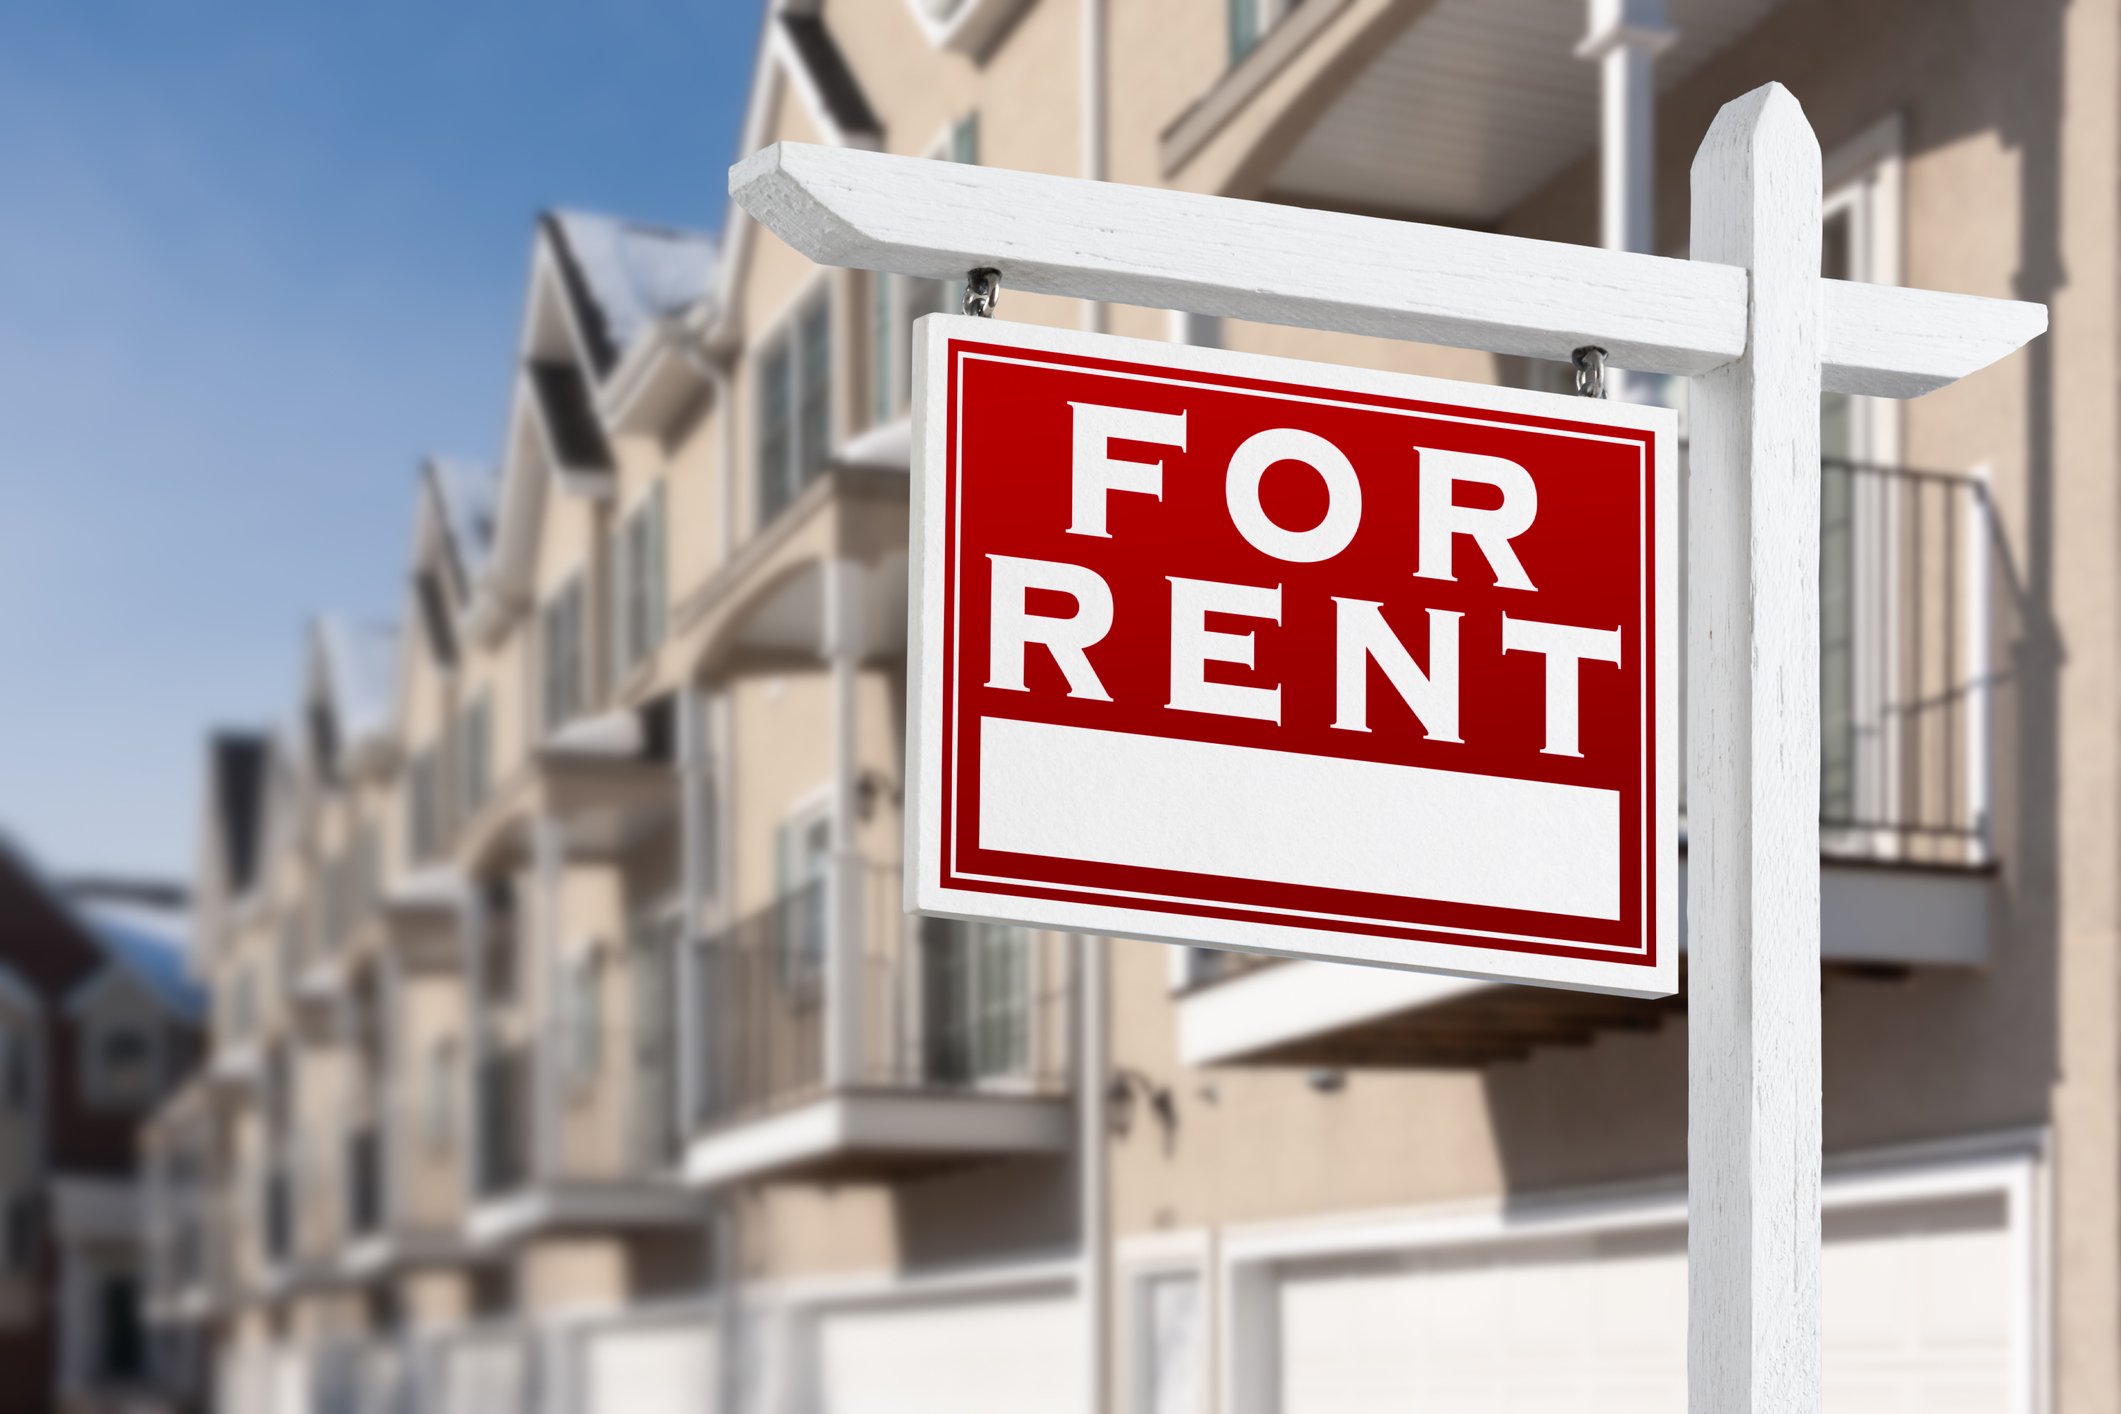 A “for rent” sign stands before a row of beige townhomes.